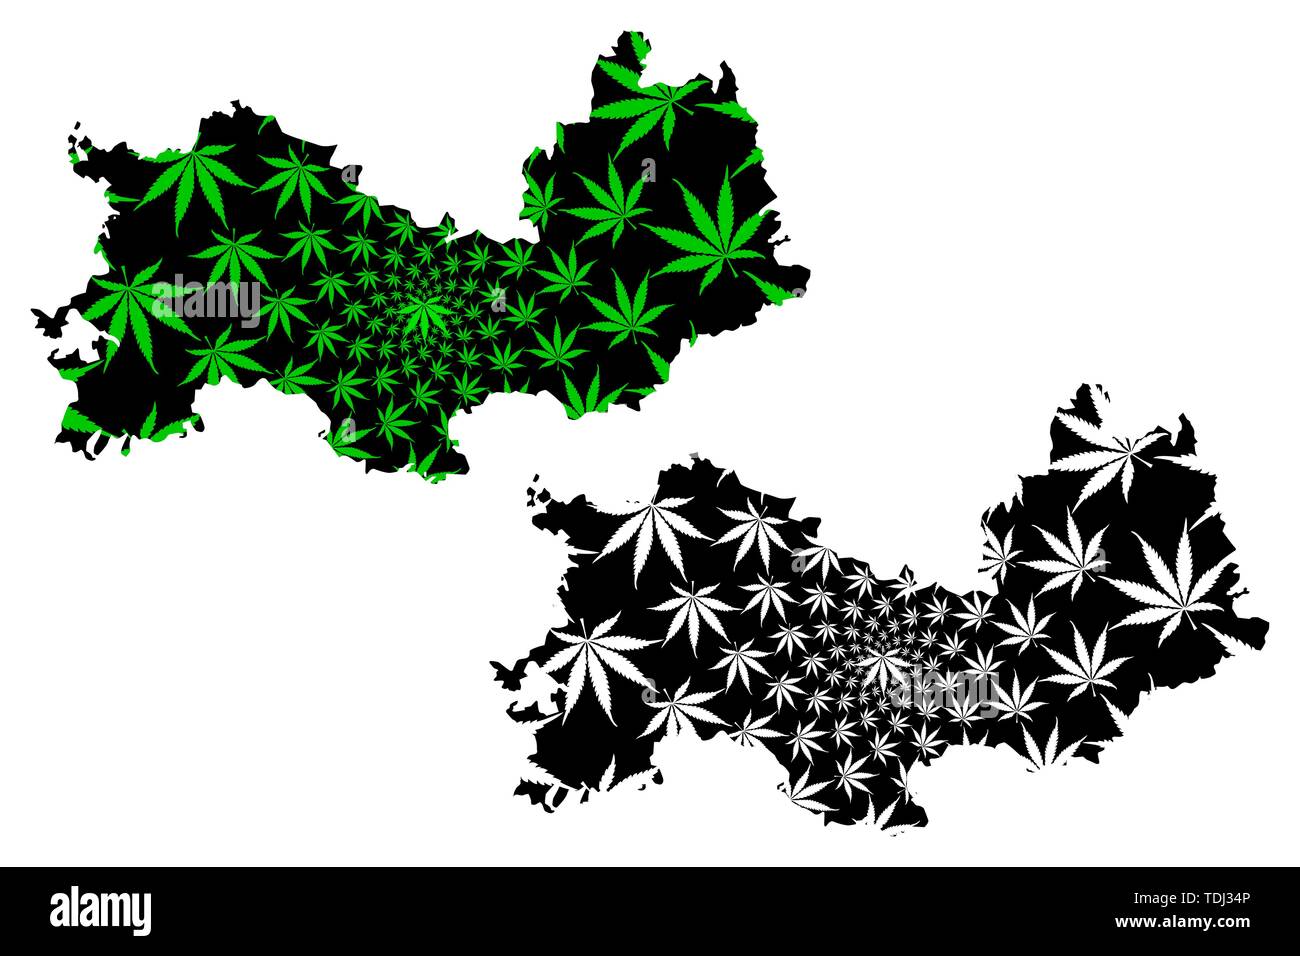 Mordovia (Russia, Russian Federation, Republics of Russia) map is designed cannabis leaf green and black, scribble sketch Republic of Mordovia map mad Stock Vector